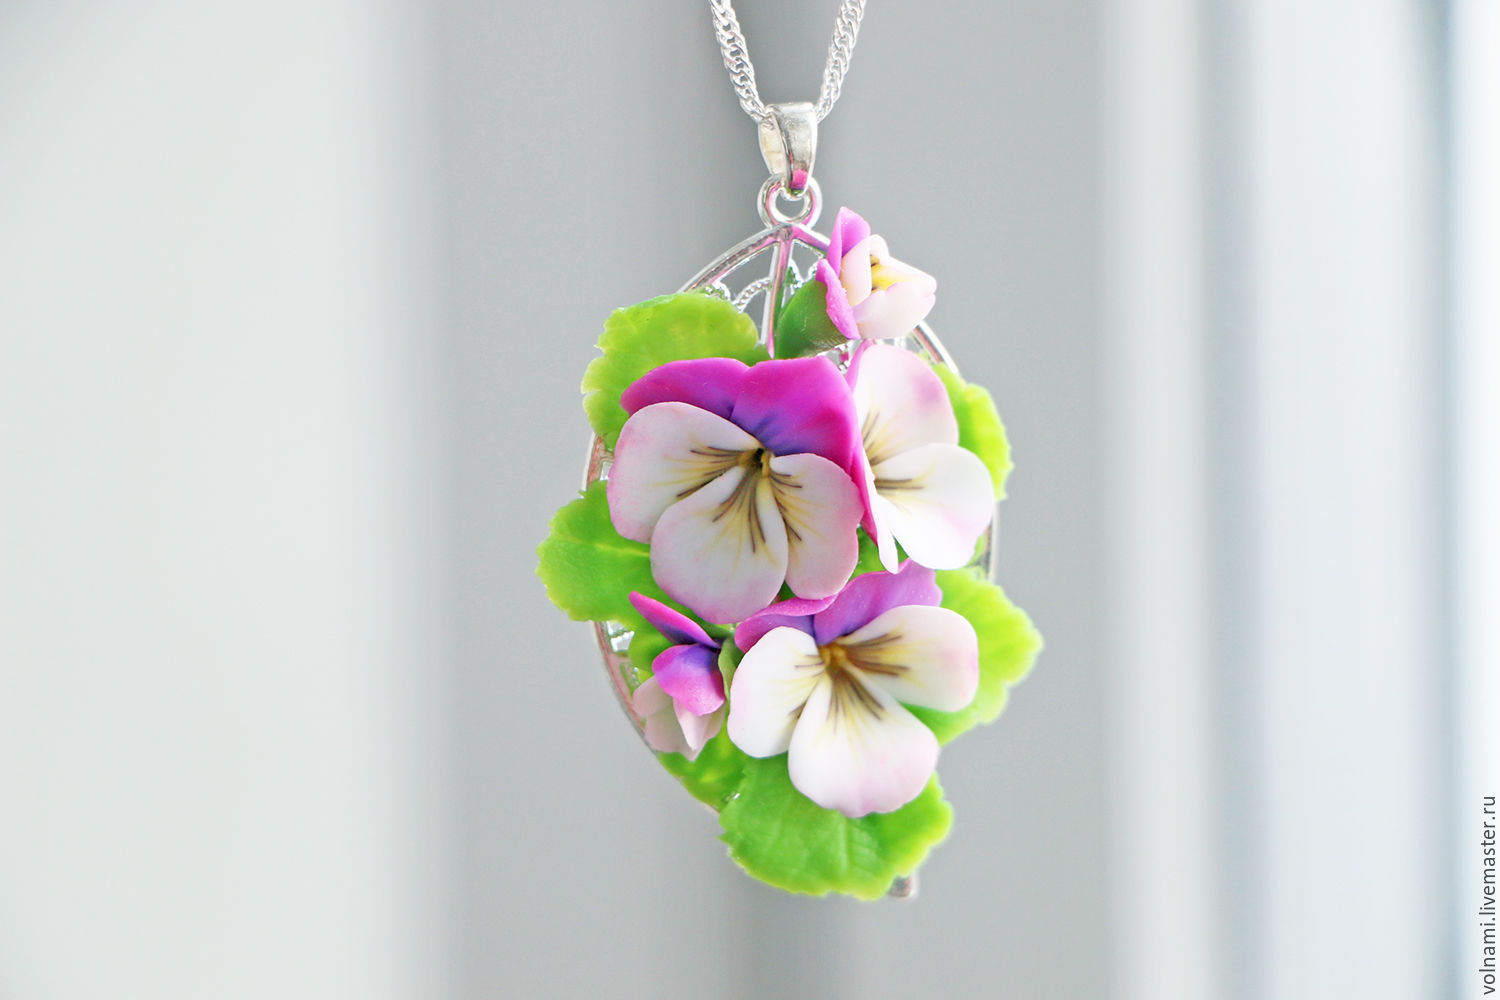 Polymer clay jewelry with pansies